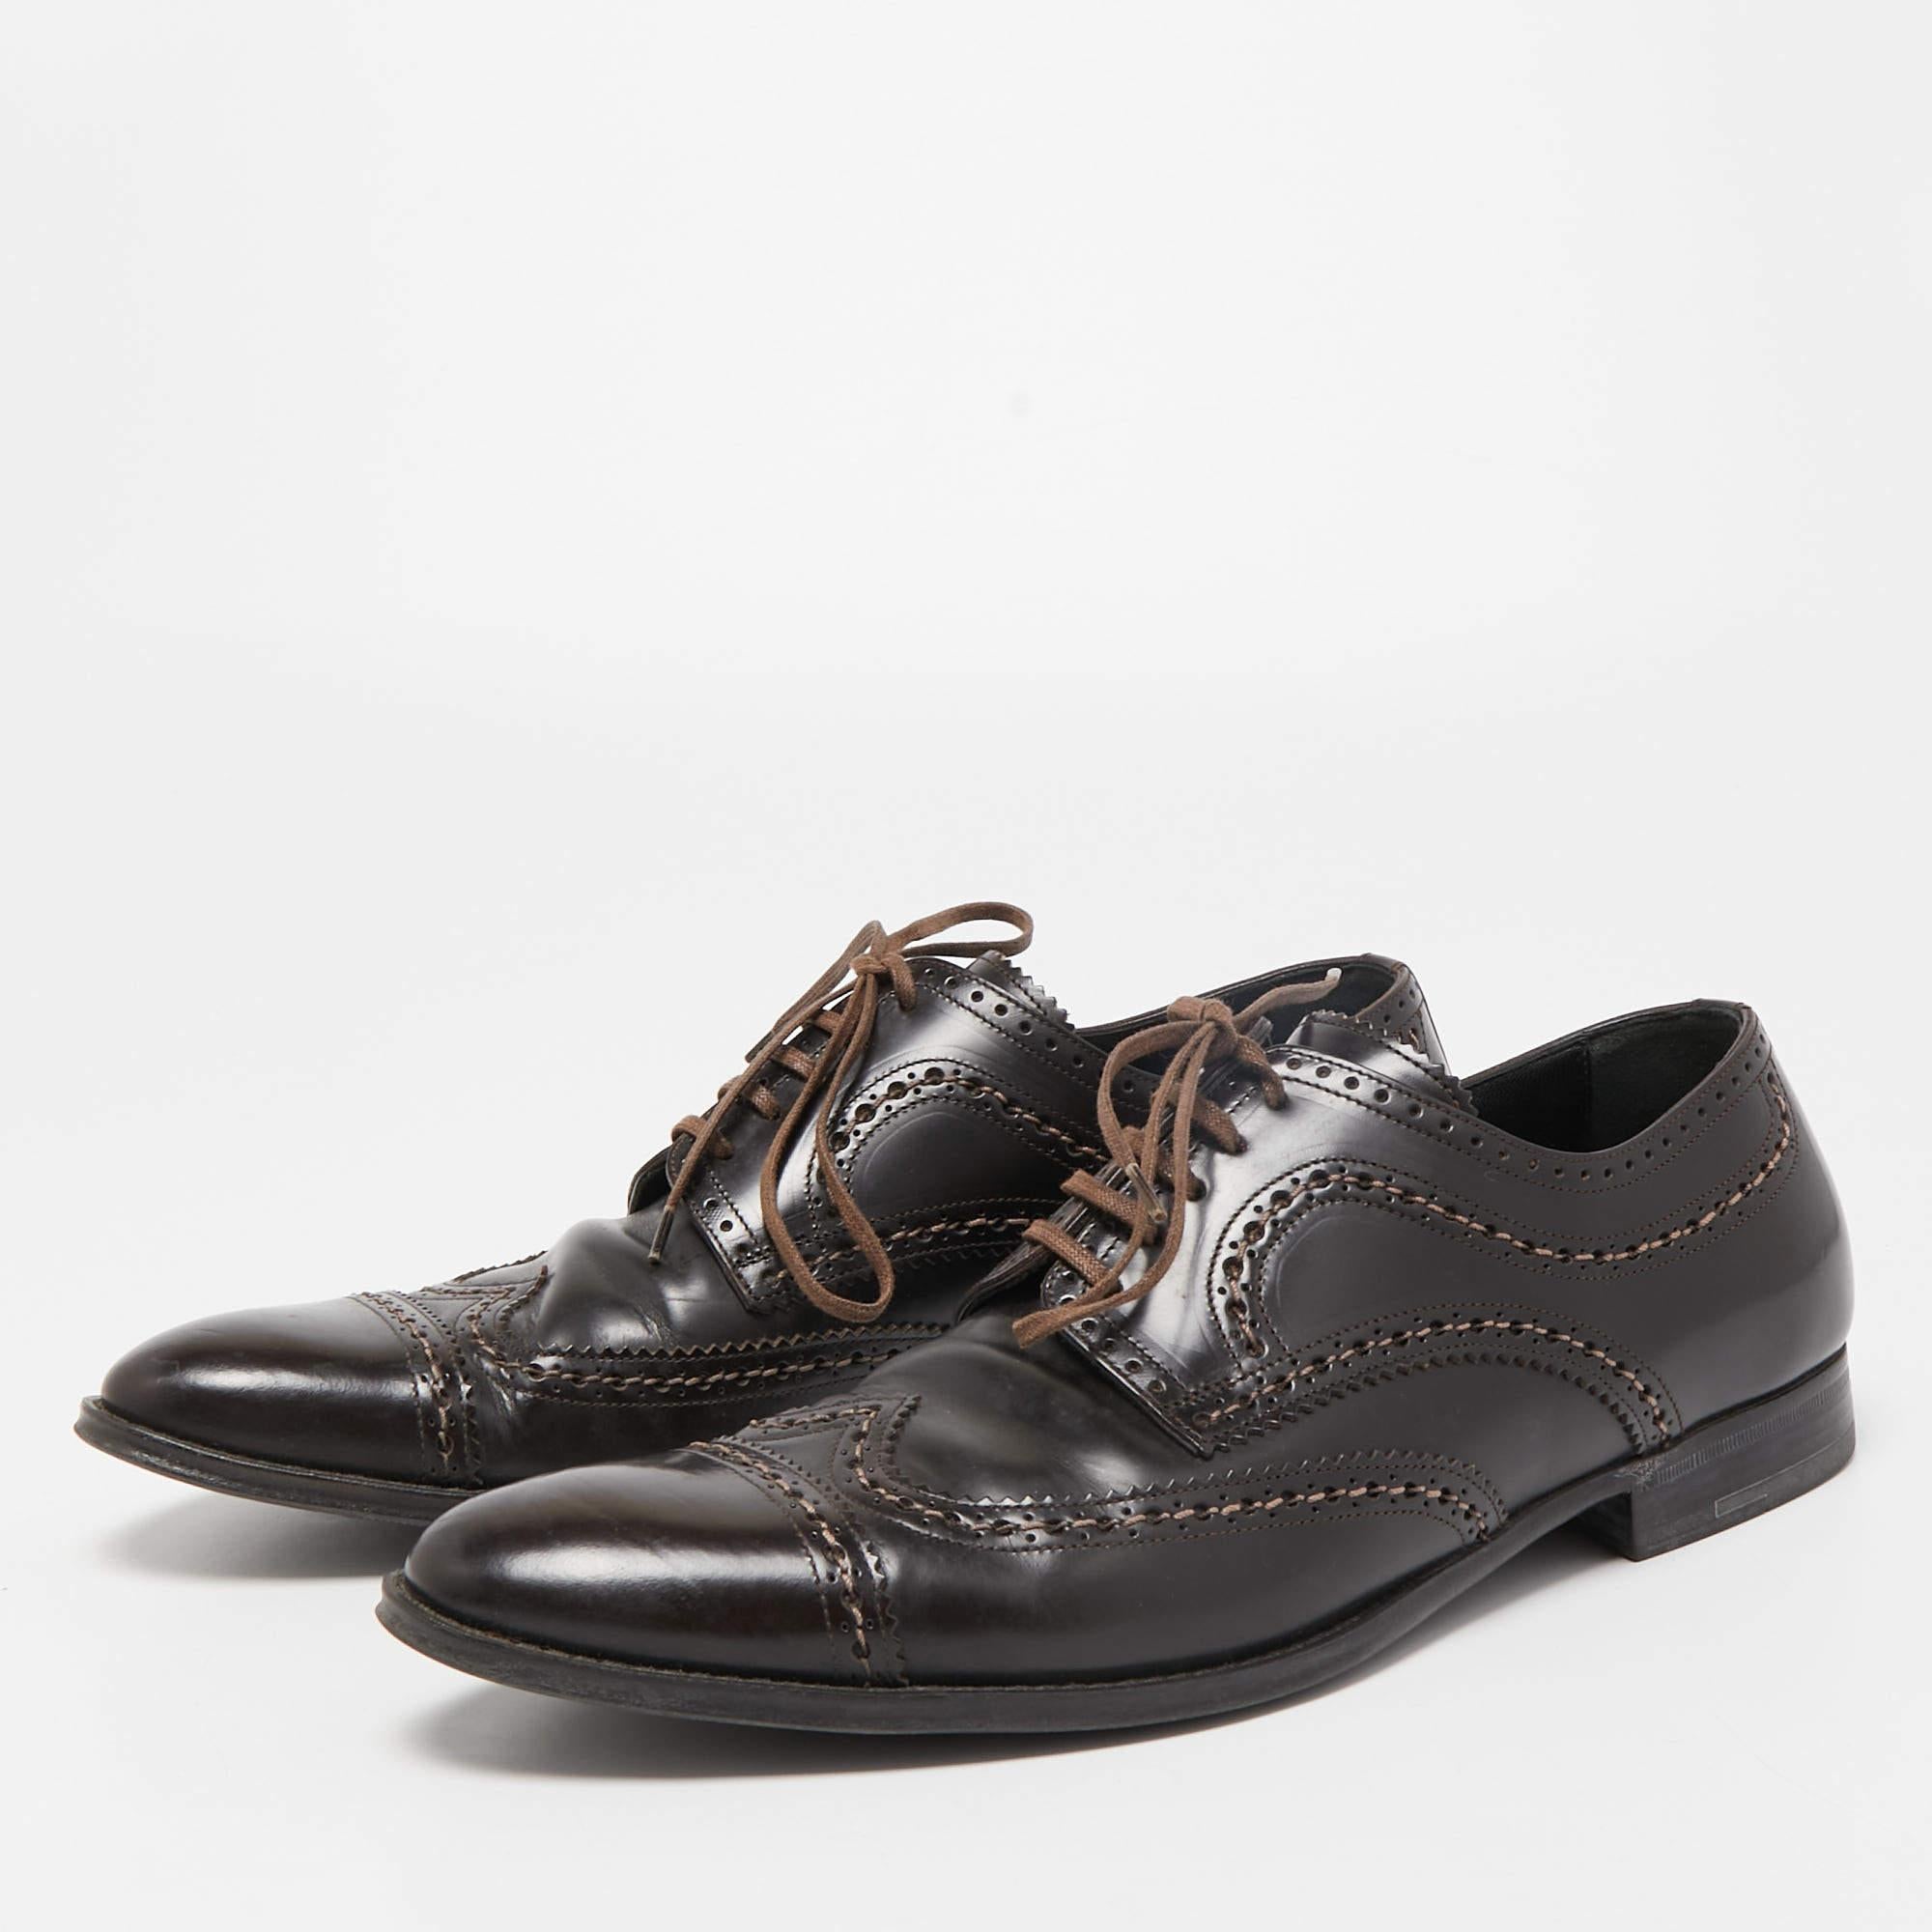 Take your shoe game a notch up with these designer derby shoes from Louis Vuitton. The brown leather formal shoes for men are added with lace-up closure and low heels.

